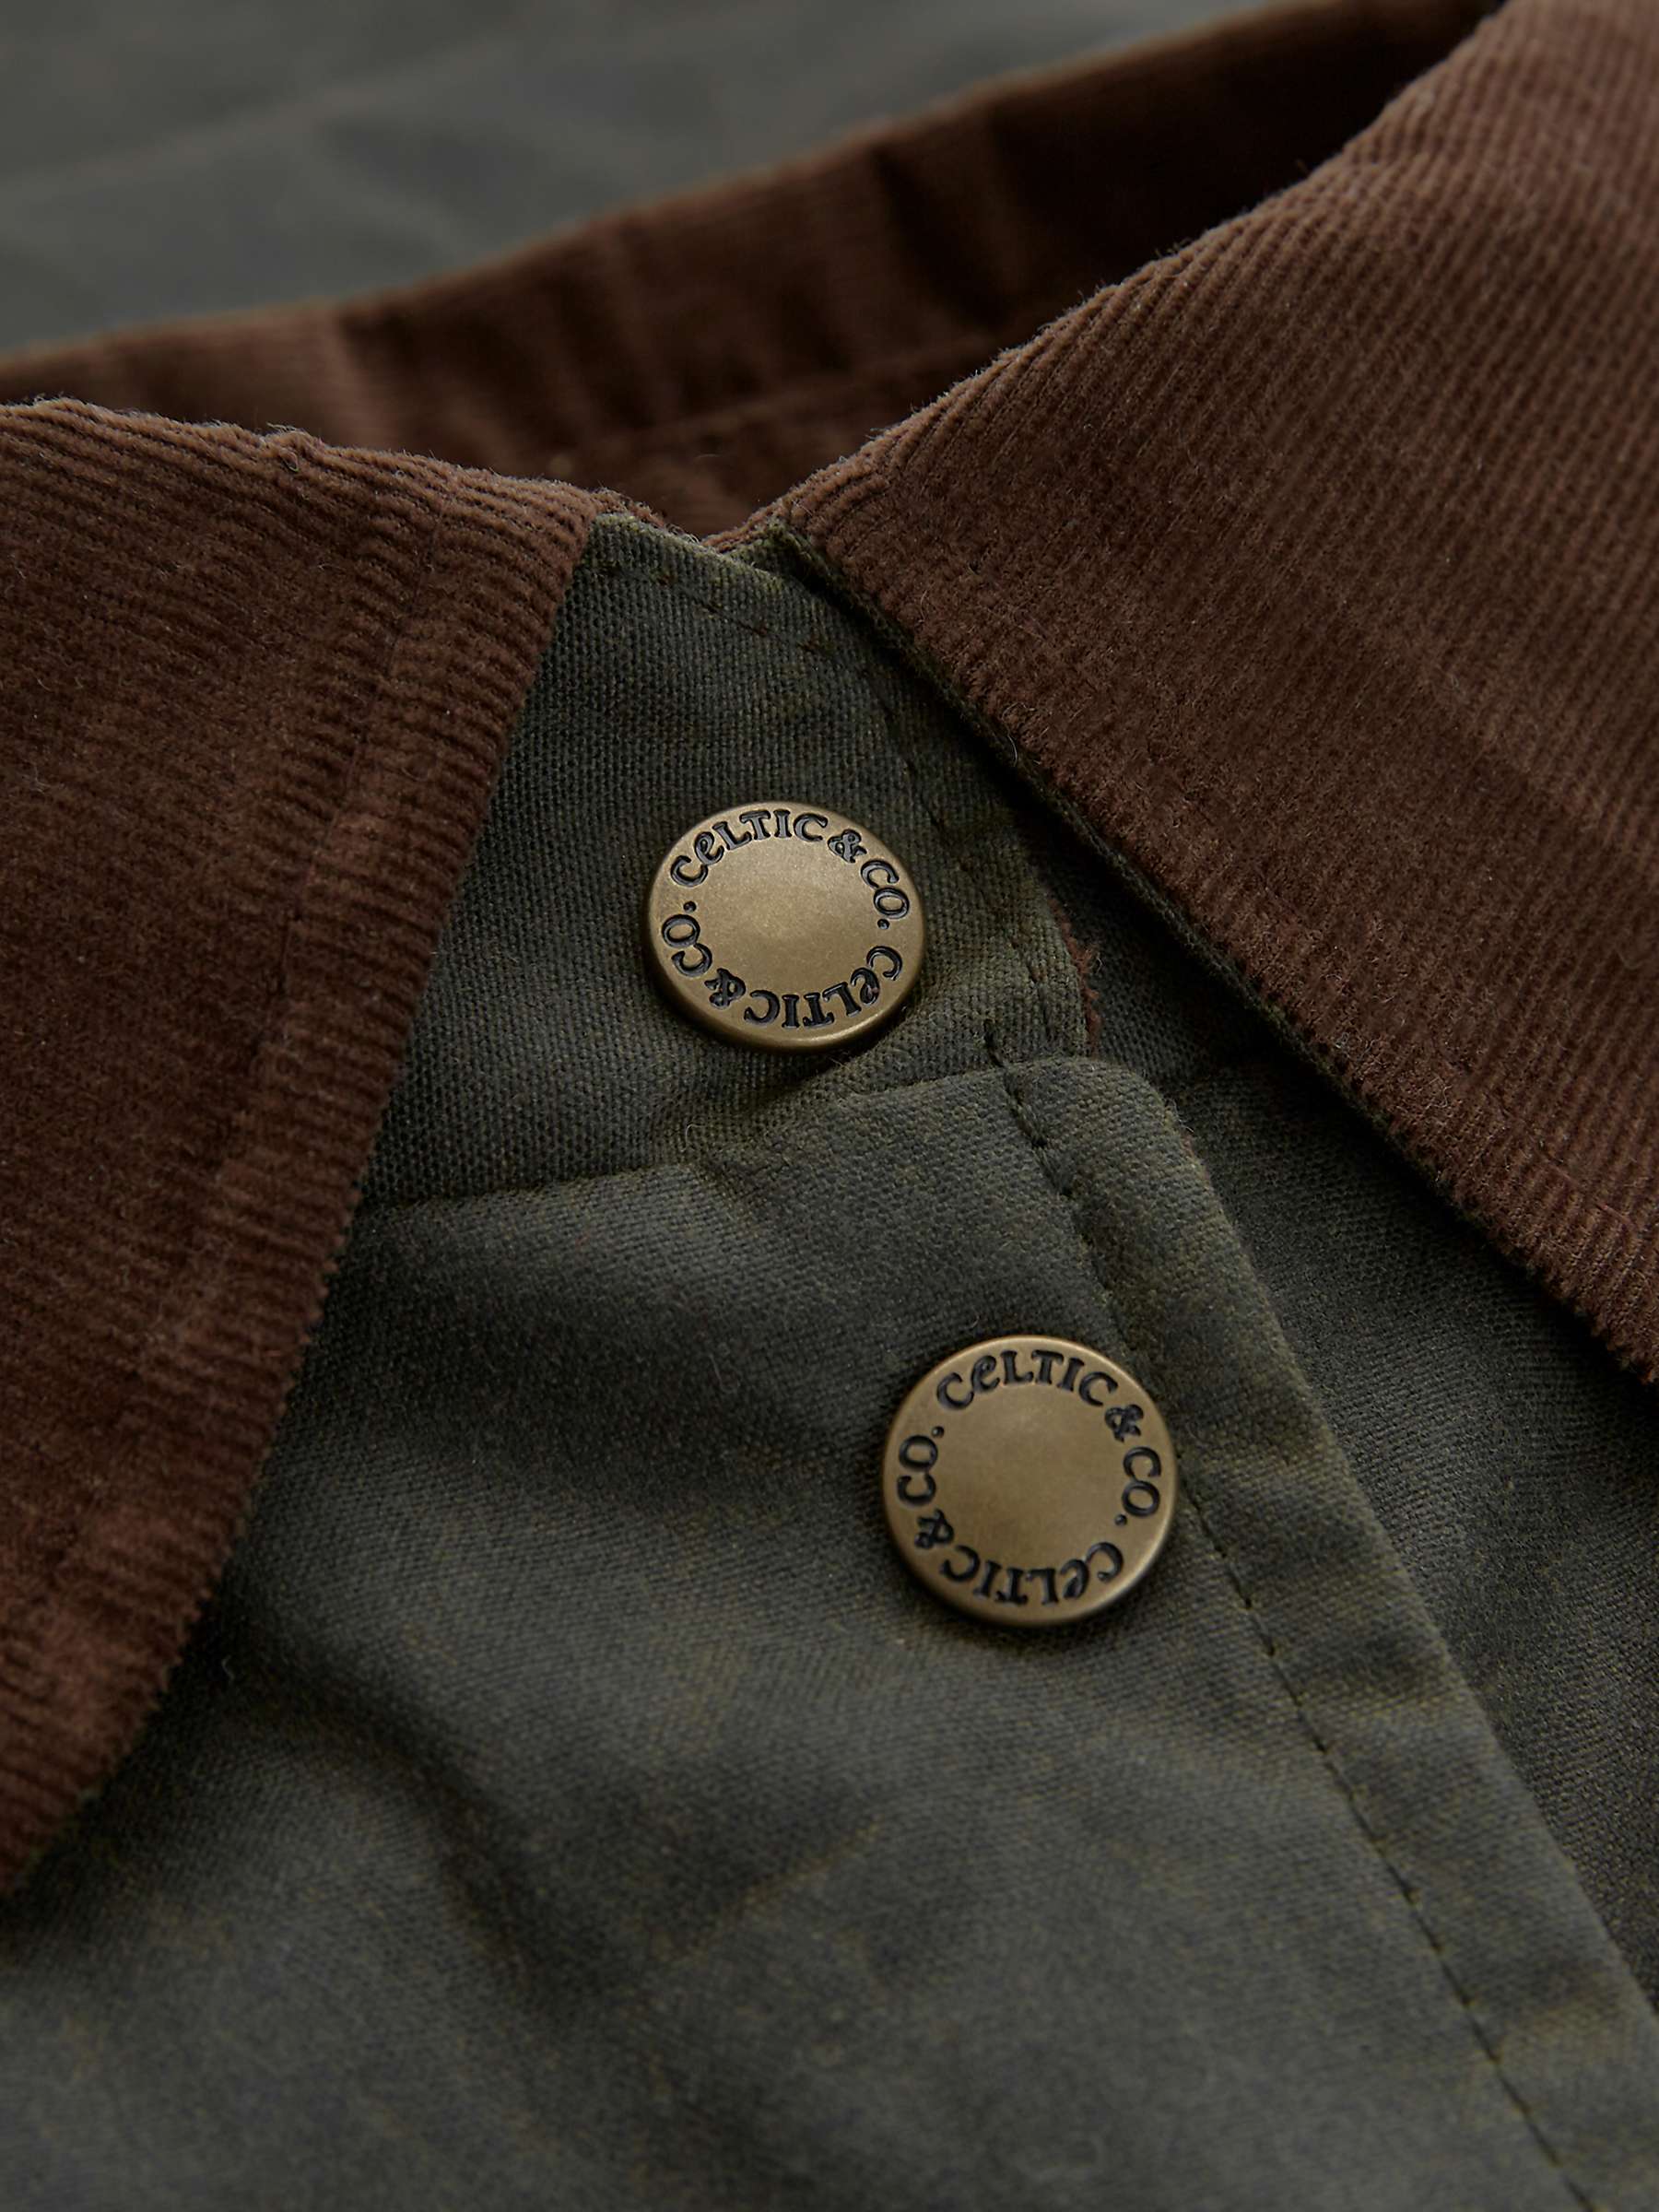 Buy Celtic & Co. Wax Cotton Overshirt, Olive Online at johnlewis.com